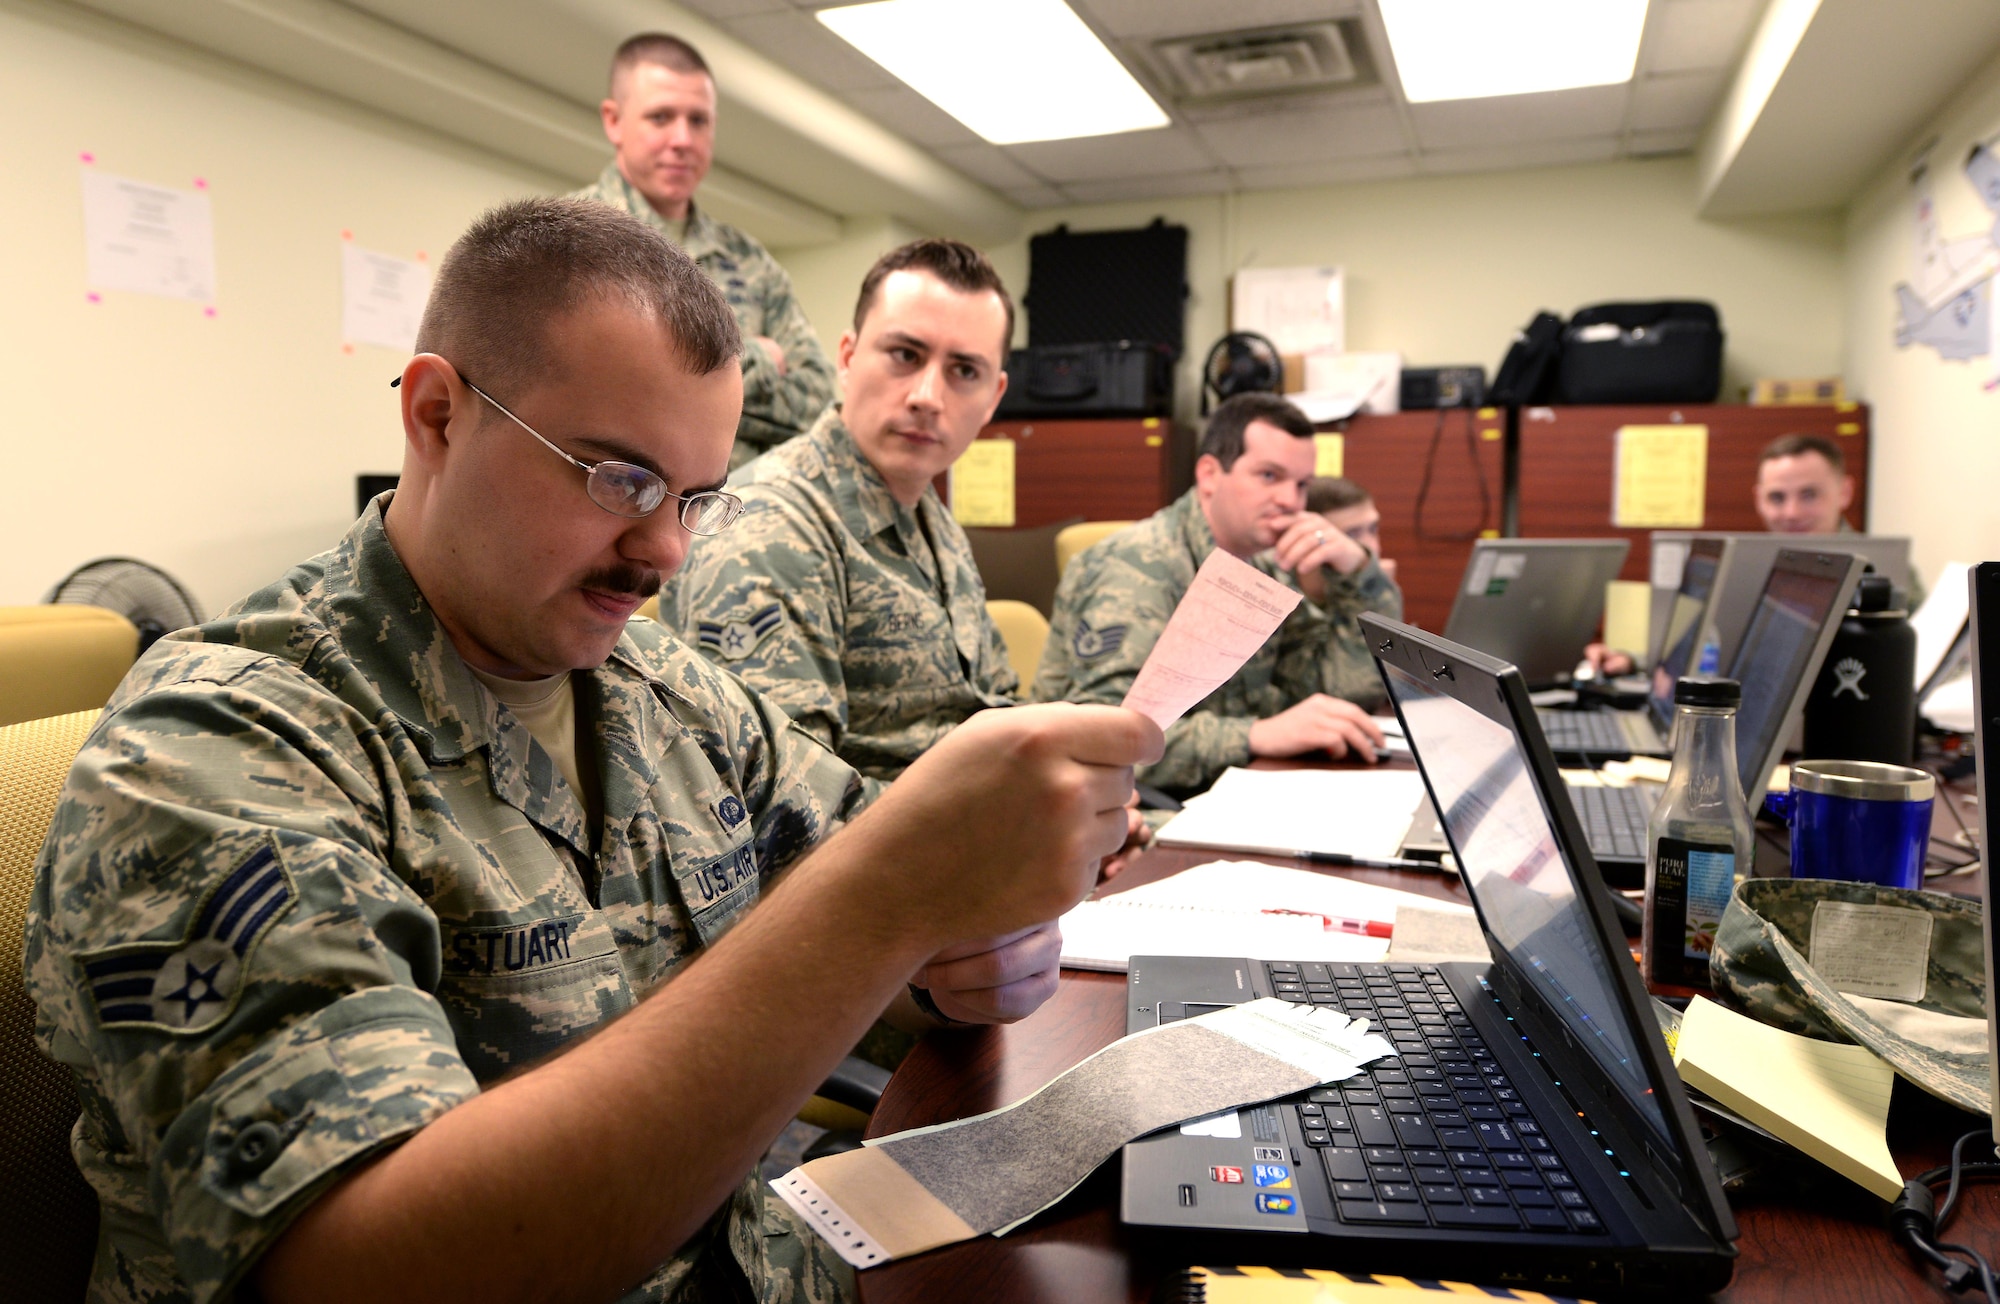 Senior Airman Jeffrey Stuart, 55th Contracting Squadron contract specialist, looks over an invoice while resolving a simulated payment discrepancy as part of a scenario during a contingency contracting exercise May 10, 2017 at Offutt Air Force Base, Neb. The exercise lasted five days from May 8 – 12 and was designed to improve contracting readiness for bare base operations. (U.S. Air Force photo by Delanie Stafford)